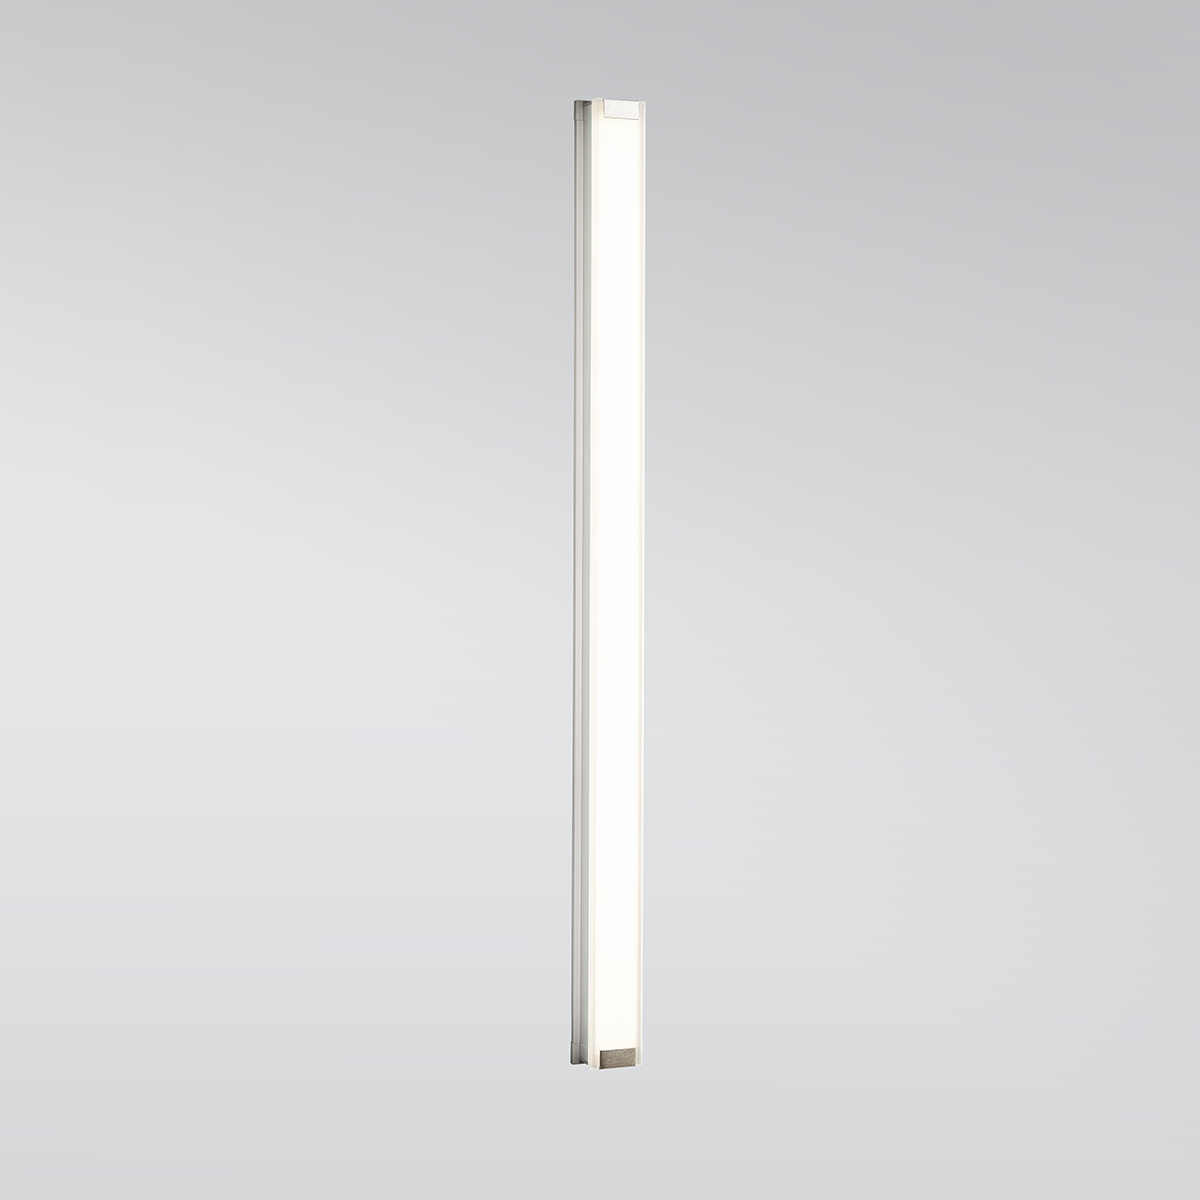 A flat linear wall sconce with a thin, luminous body 